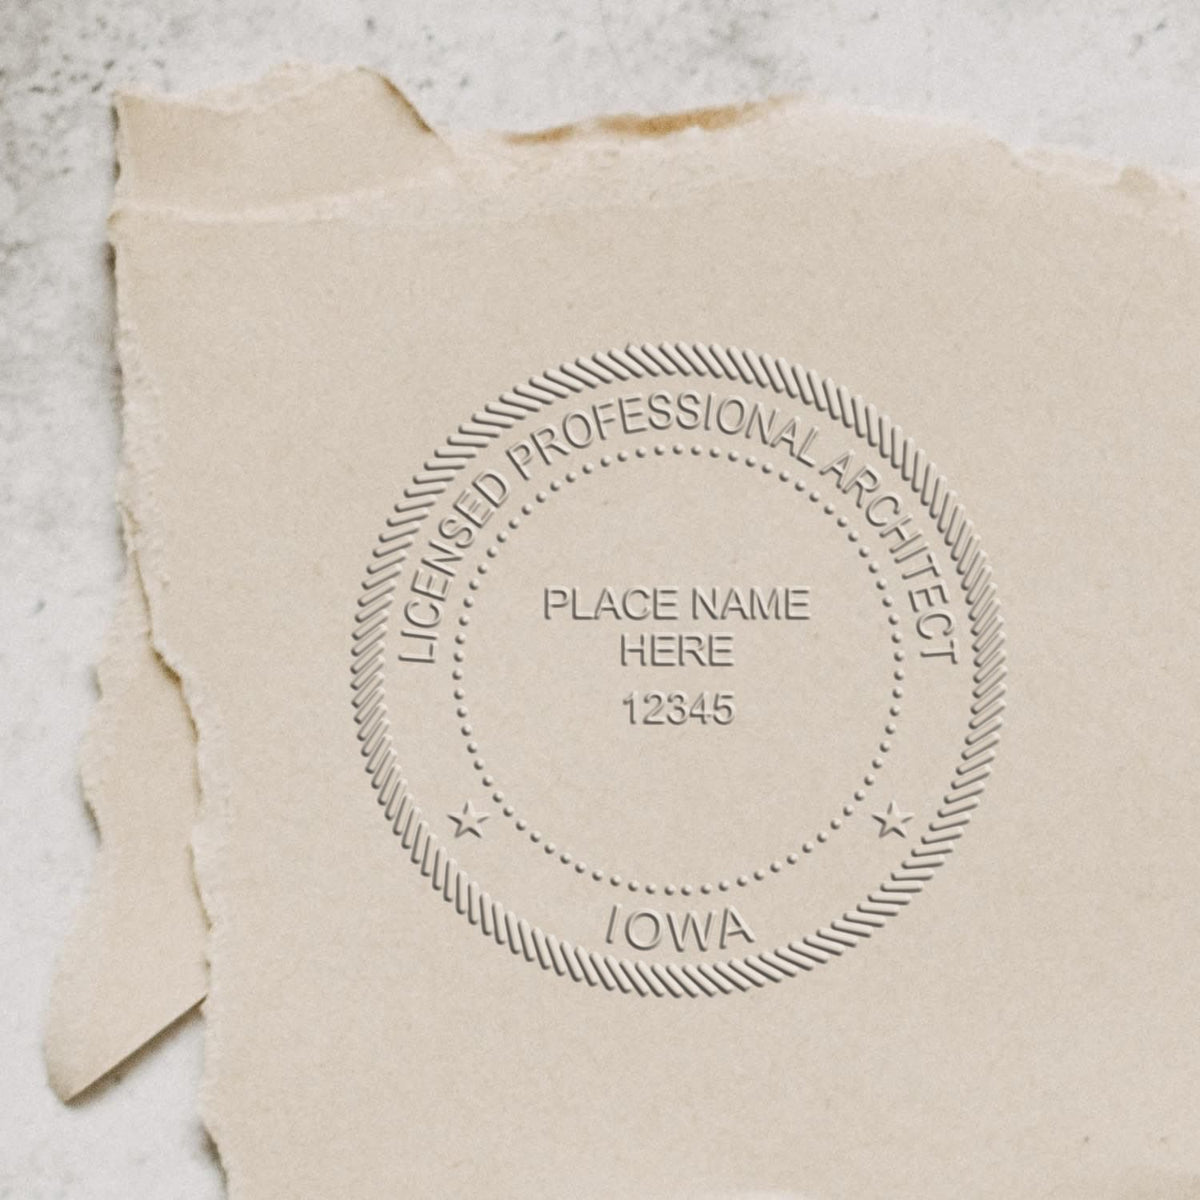 The State of Iowa Long Reach Architectural Embossing Seal stamp impression comes to life with a crisp, detailed photo on paper - showcasing true professional quality.